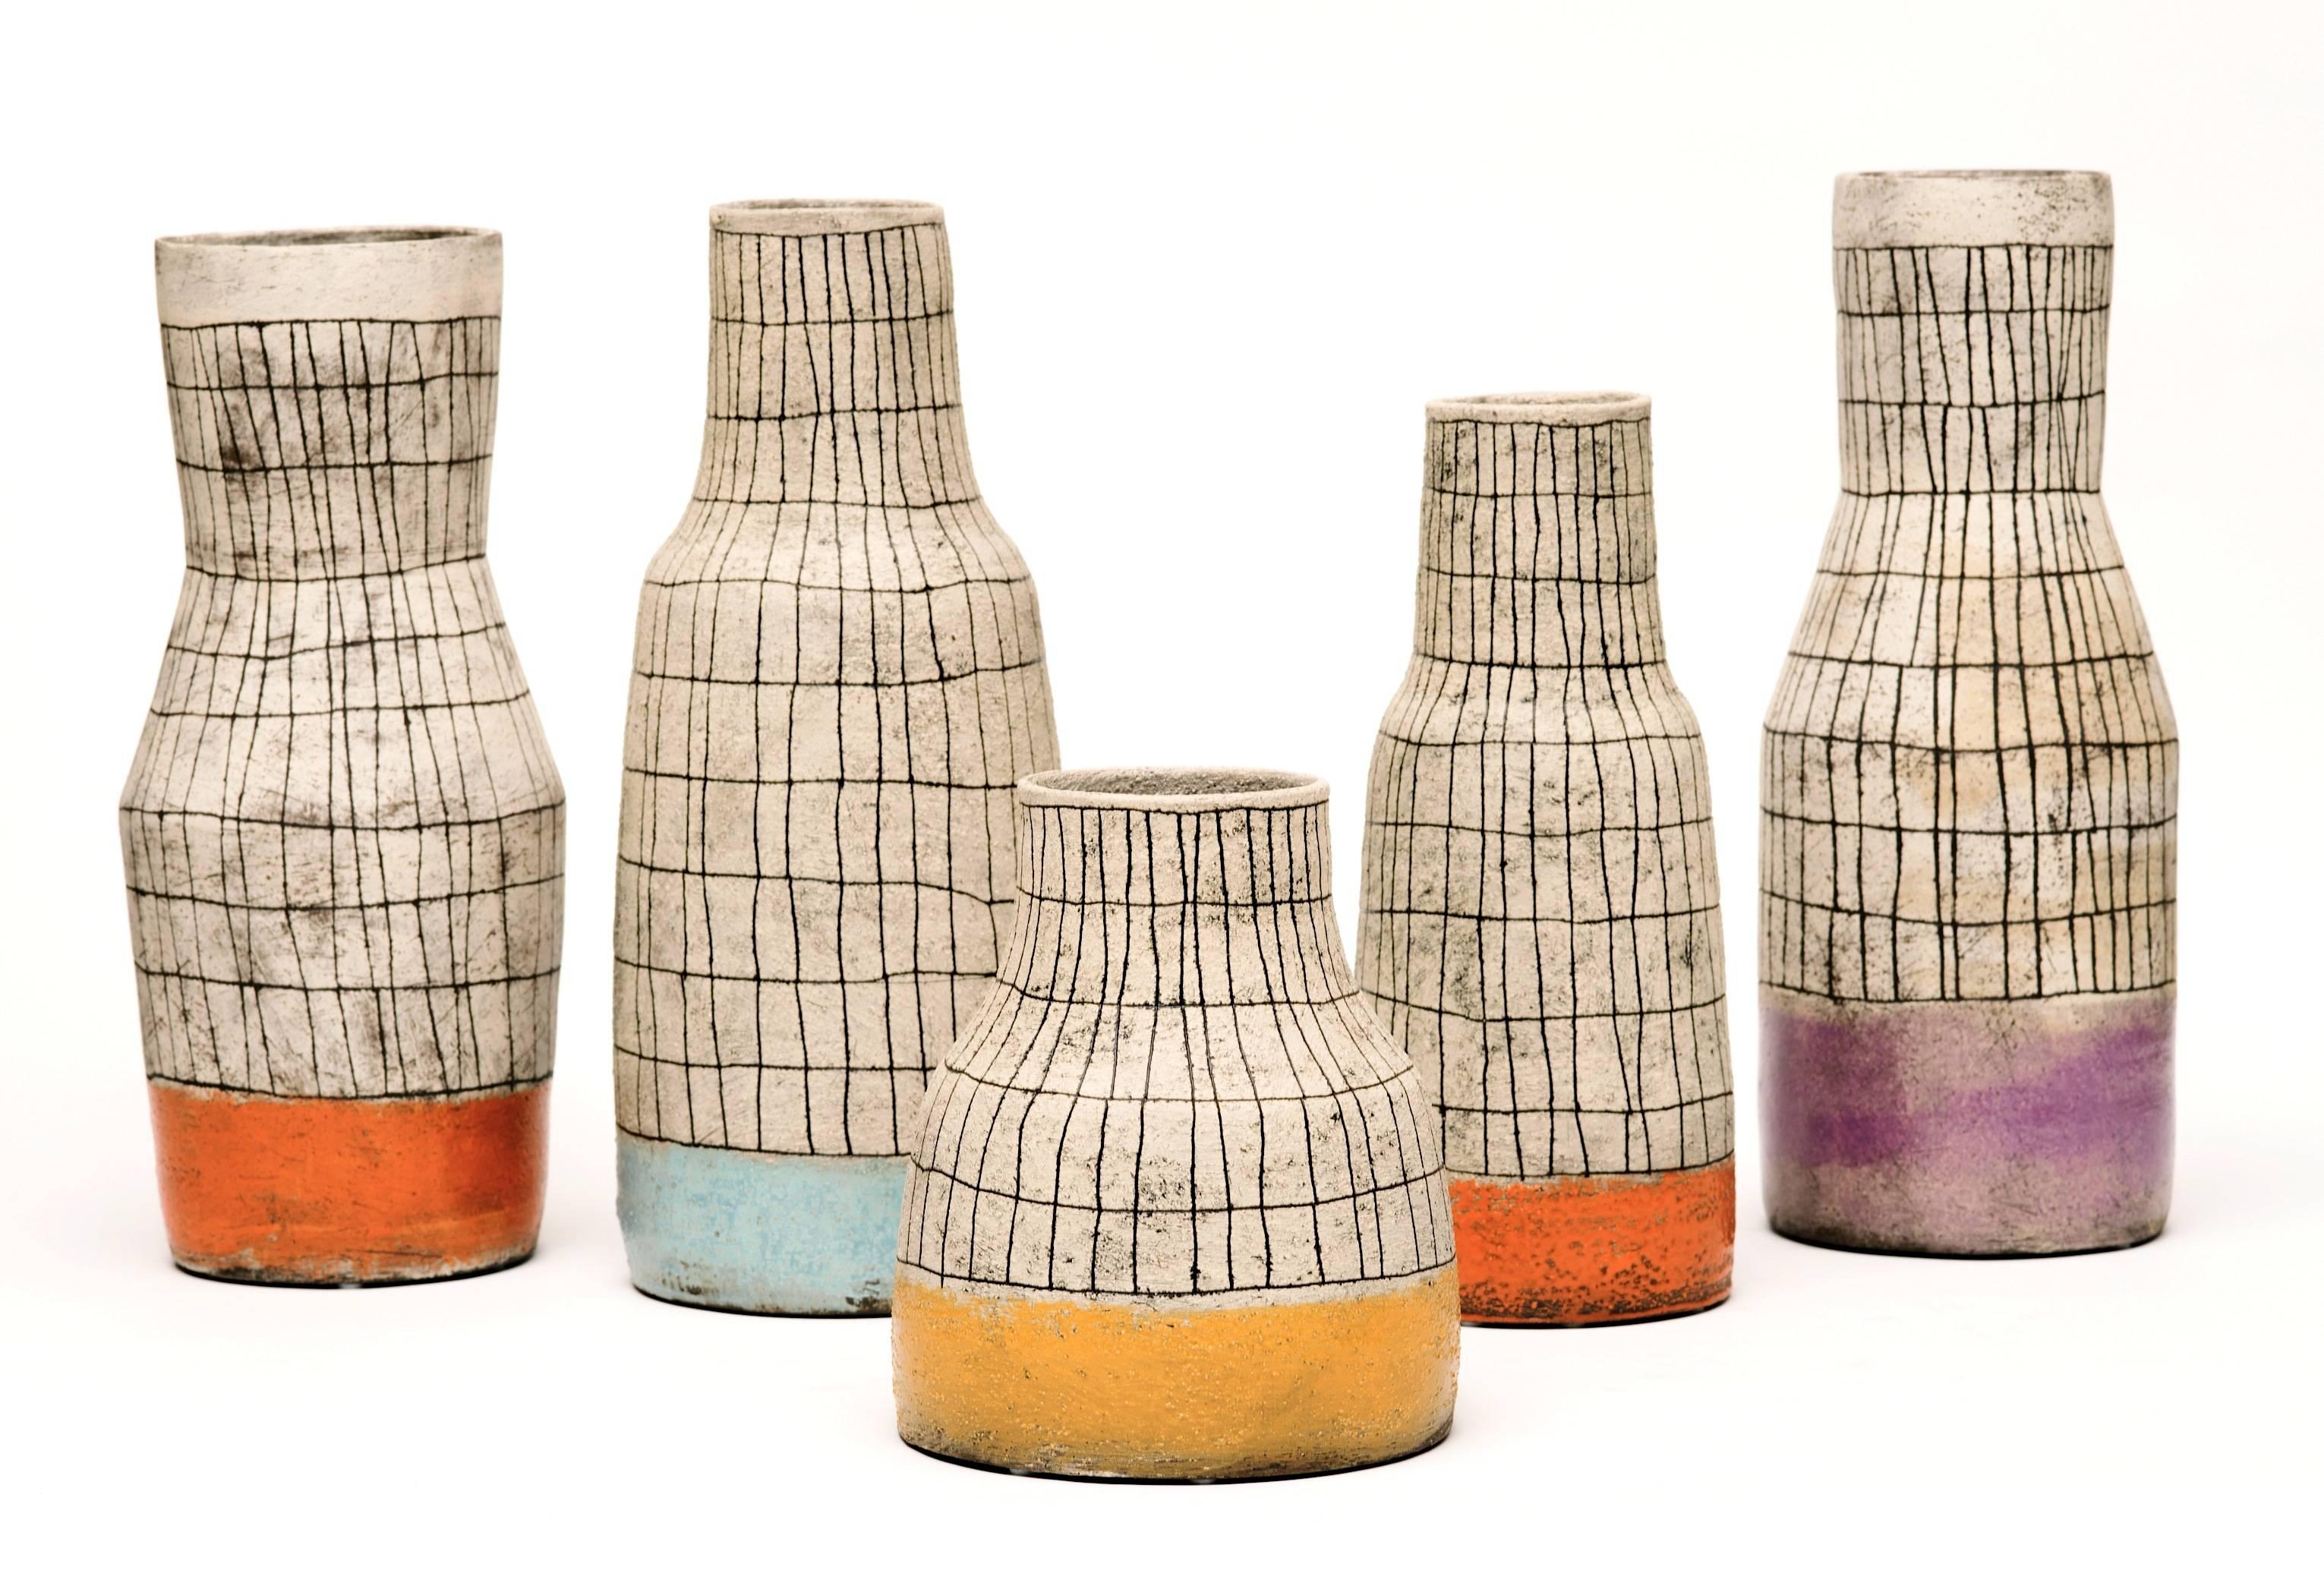 Stunning contemporary set of five sculptural vases with hand-painted lines and glazed colored bands consisting of yellow, orange, blue and lavender by U.S. artist. A perfect accent with 20th Century design.
Sizes vary from the shortest at 9.25